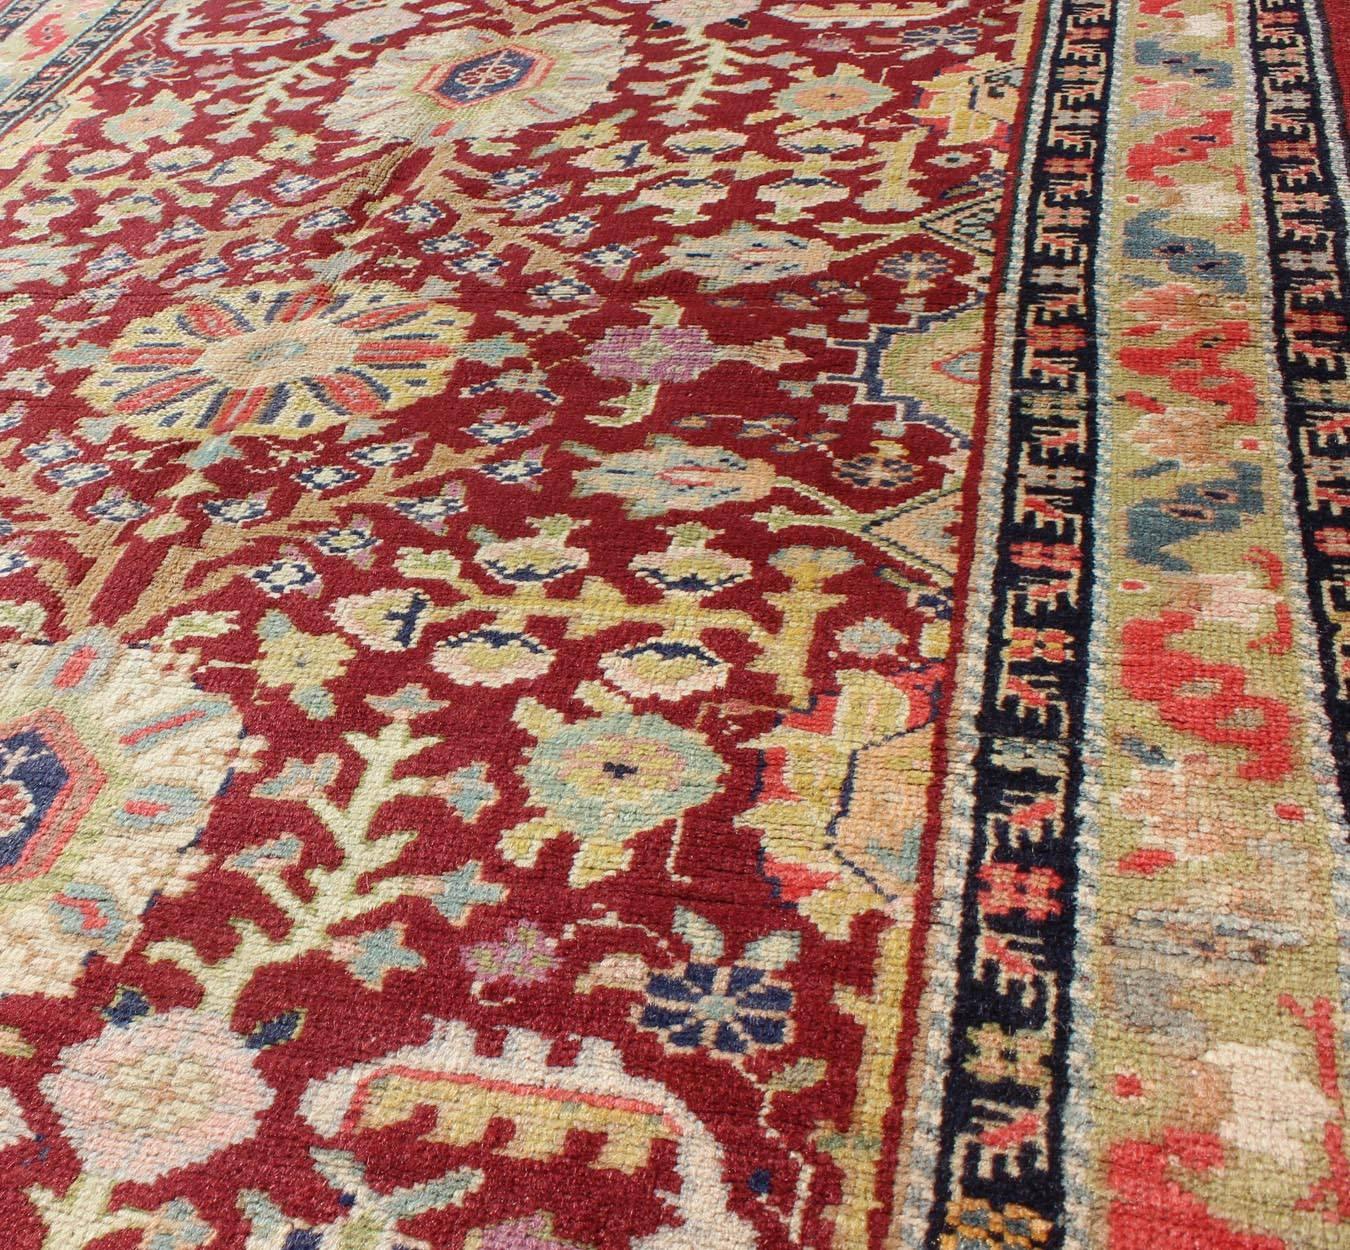 Mid-20th Century Colorful Turkish Oushak Carpet with Scattered Vines and Flowers on a Red Field For Sale